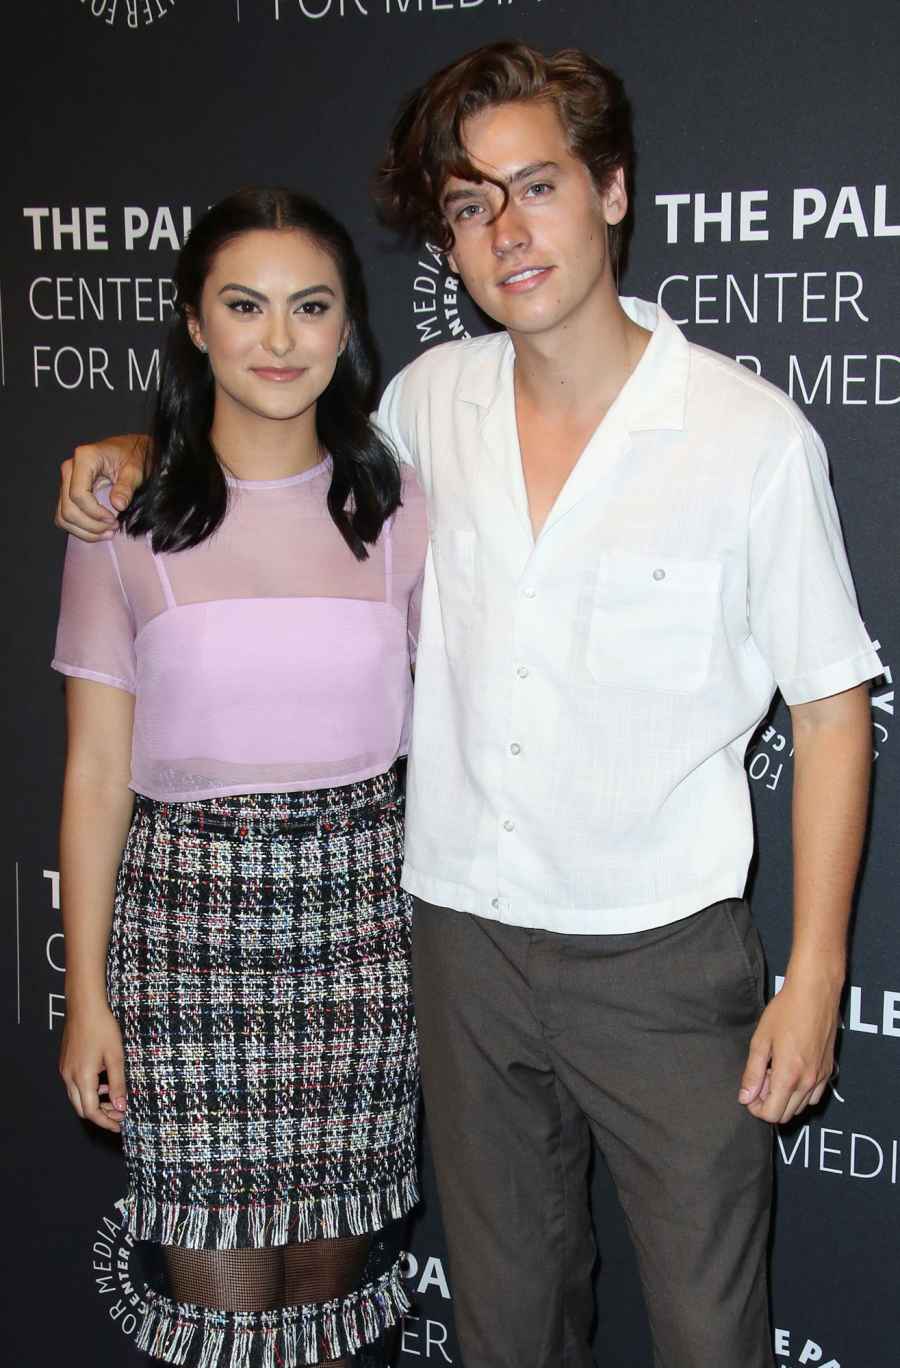 Stars Who Went to School Together Camila Mendes and Cole Sprouse